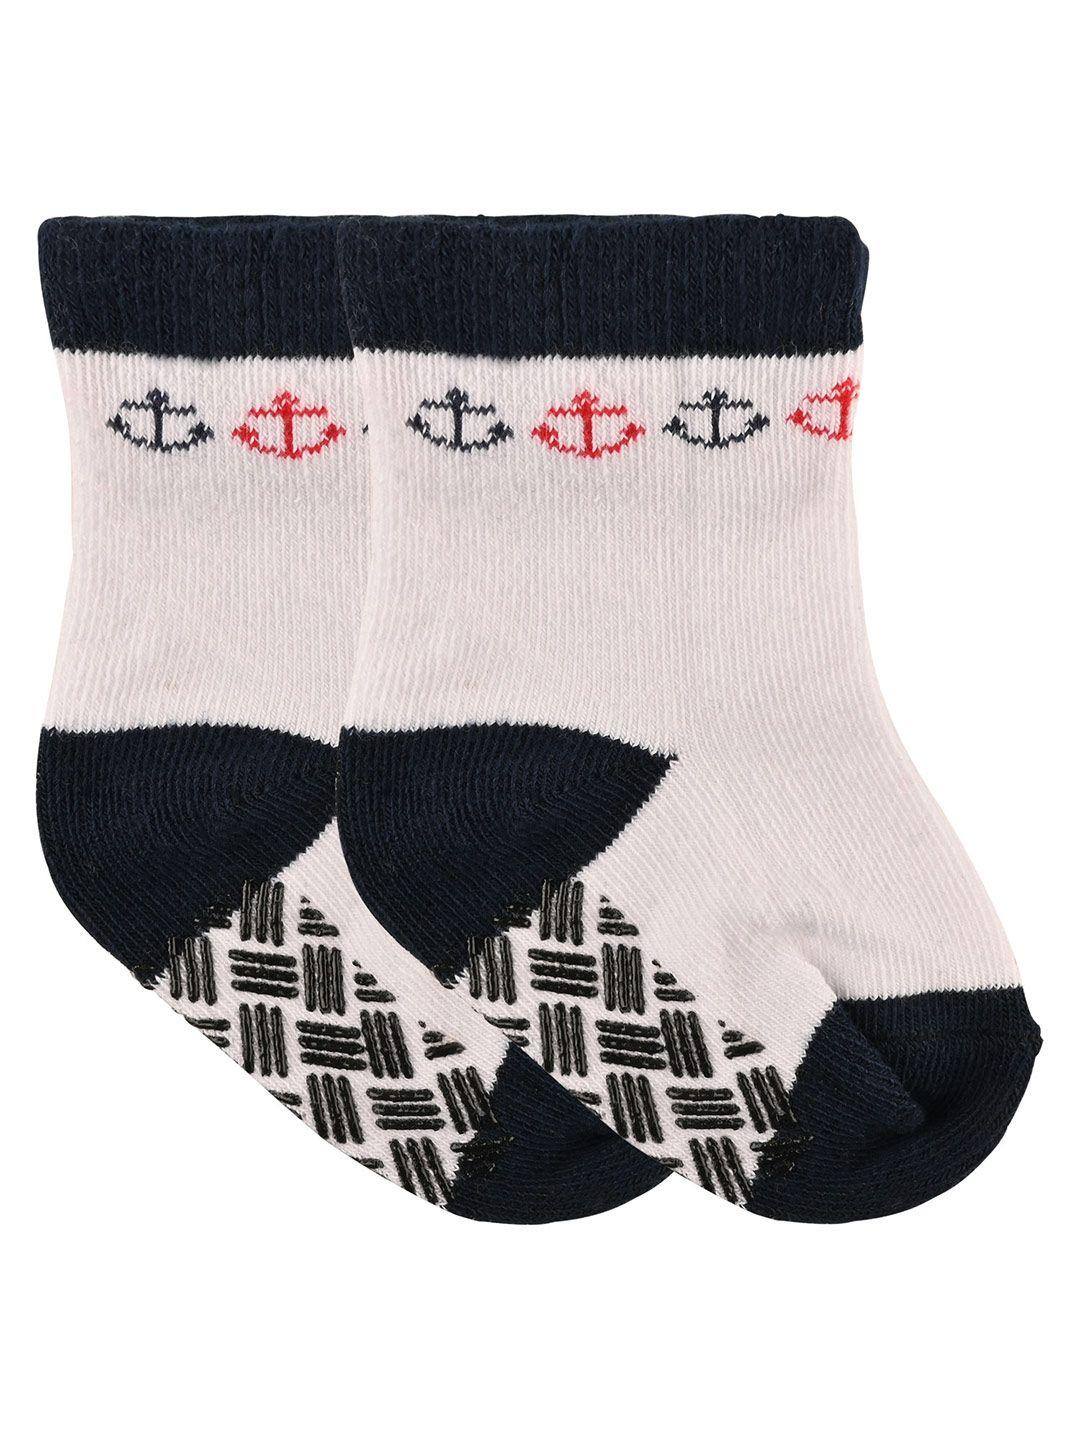 nuluv boys pack of 3 striped printed ankle length cotton socks